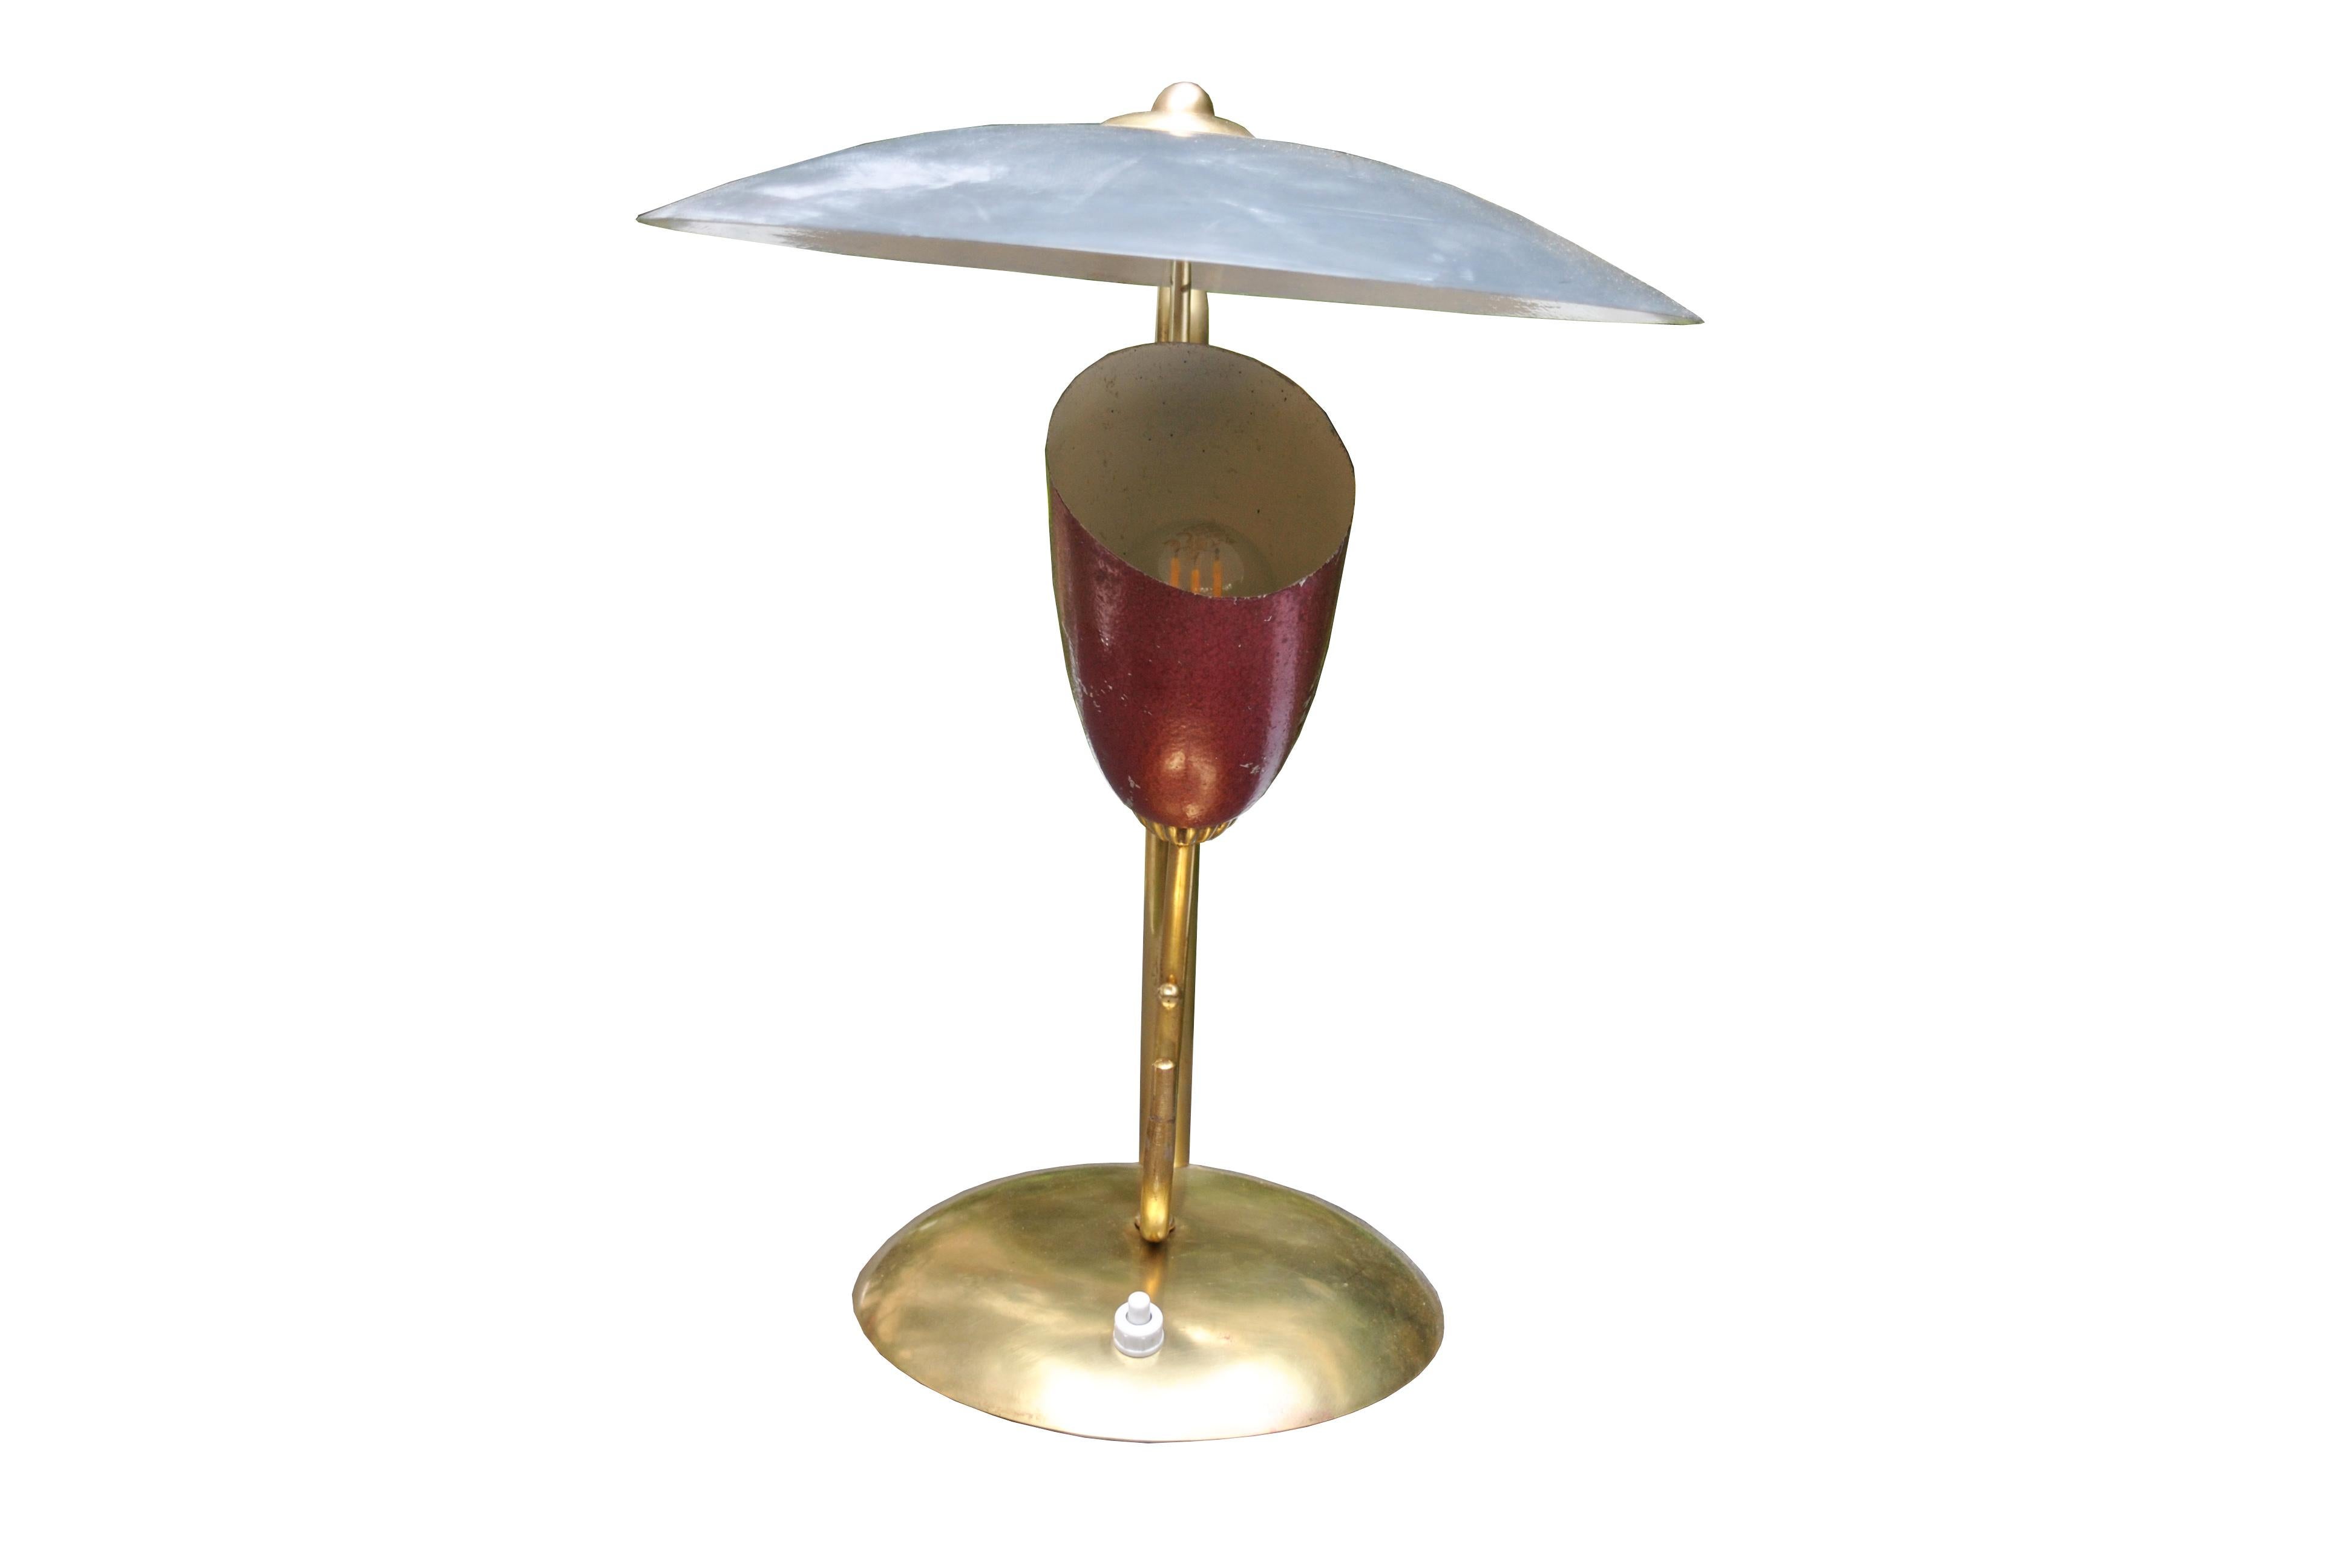 Midcentury table lamp after Angelo Lelli, designer and founder of the Italian company Arredoluce, 1950s.
The structure is fully in brass with an aluminium cover.